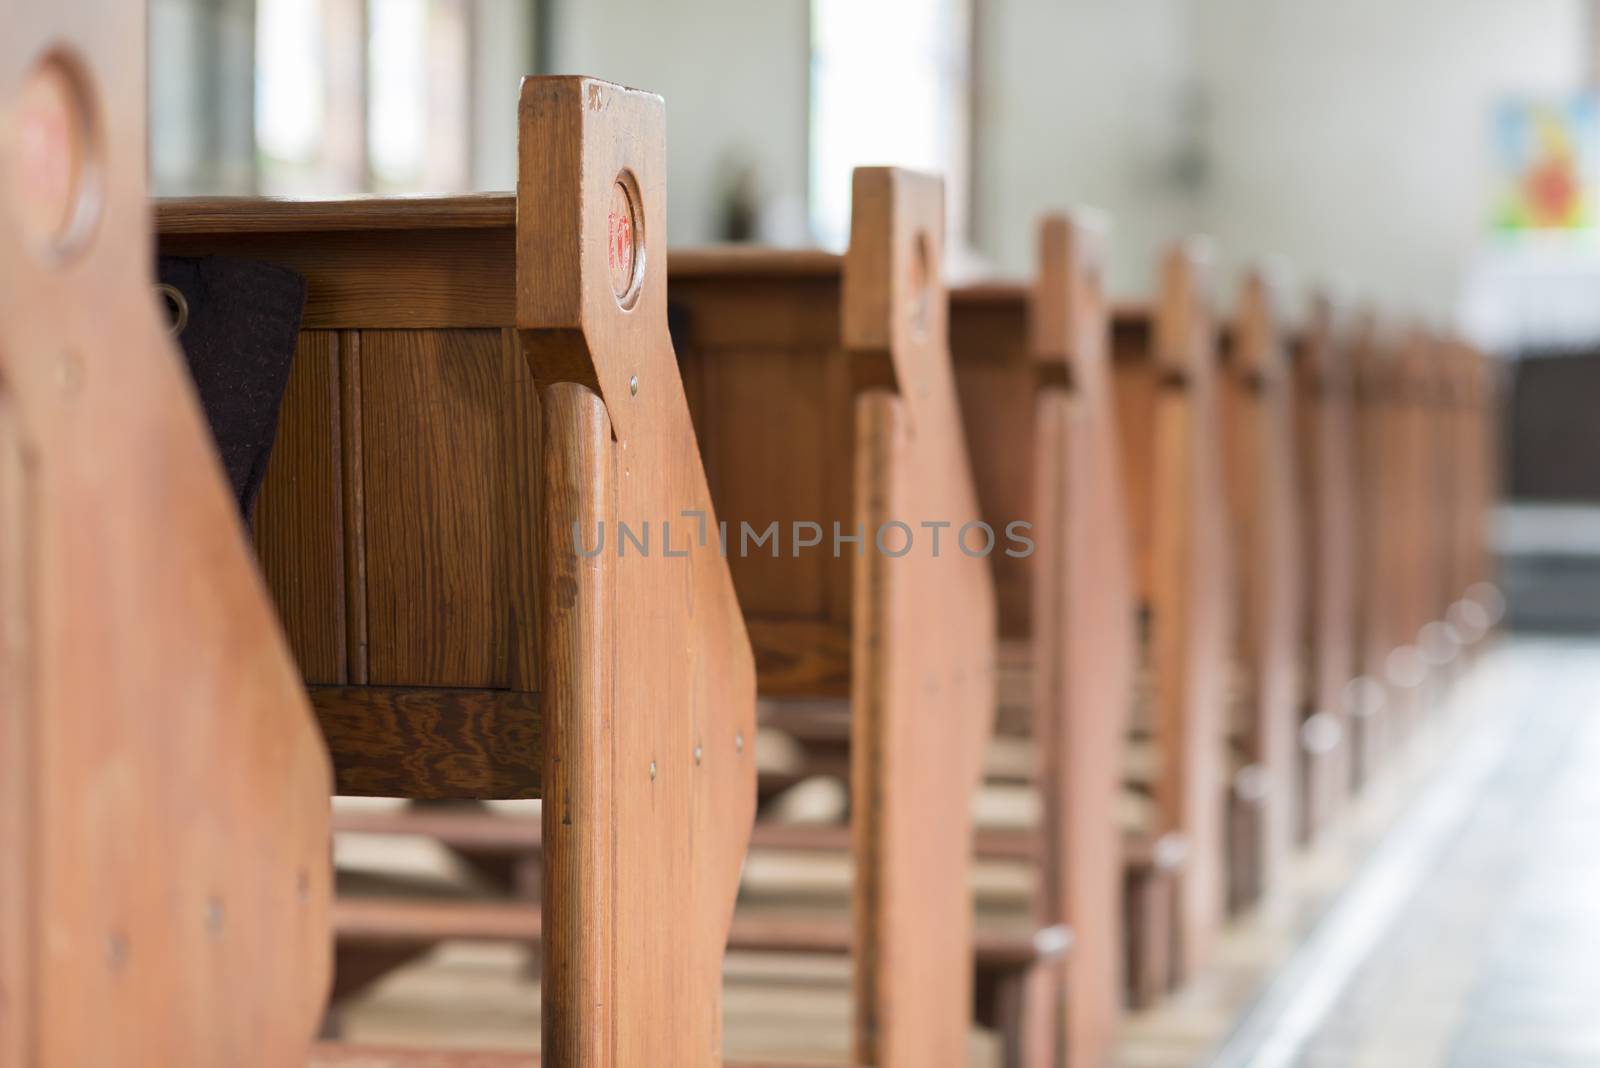 Pews in an old church
 by Tofotografie